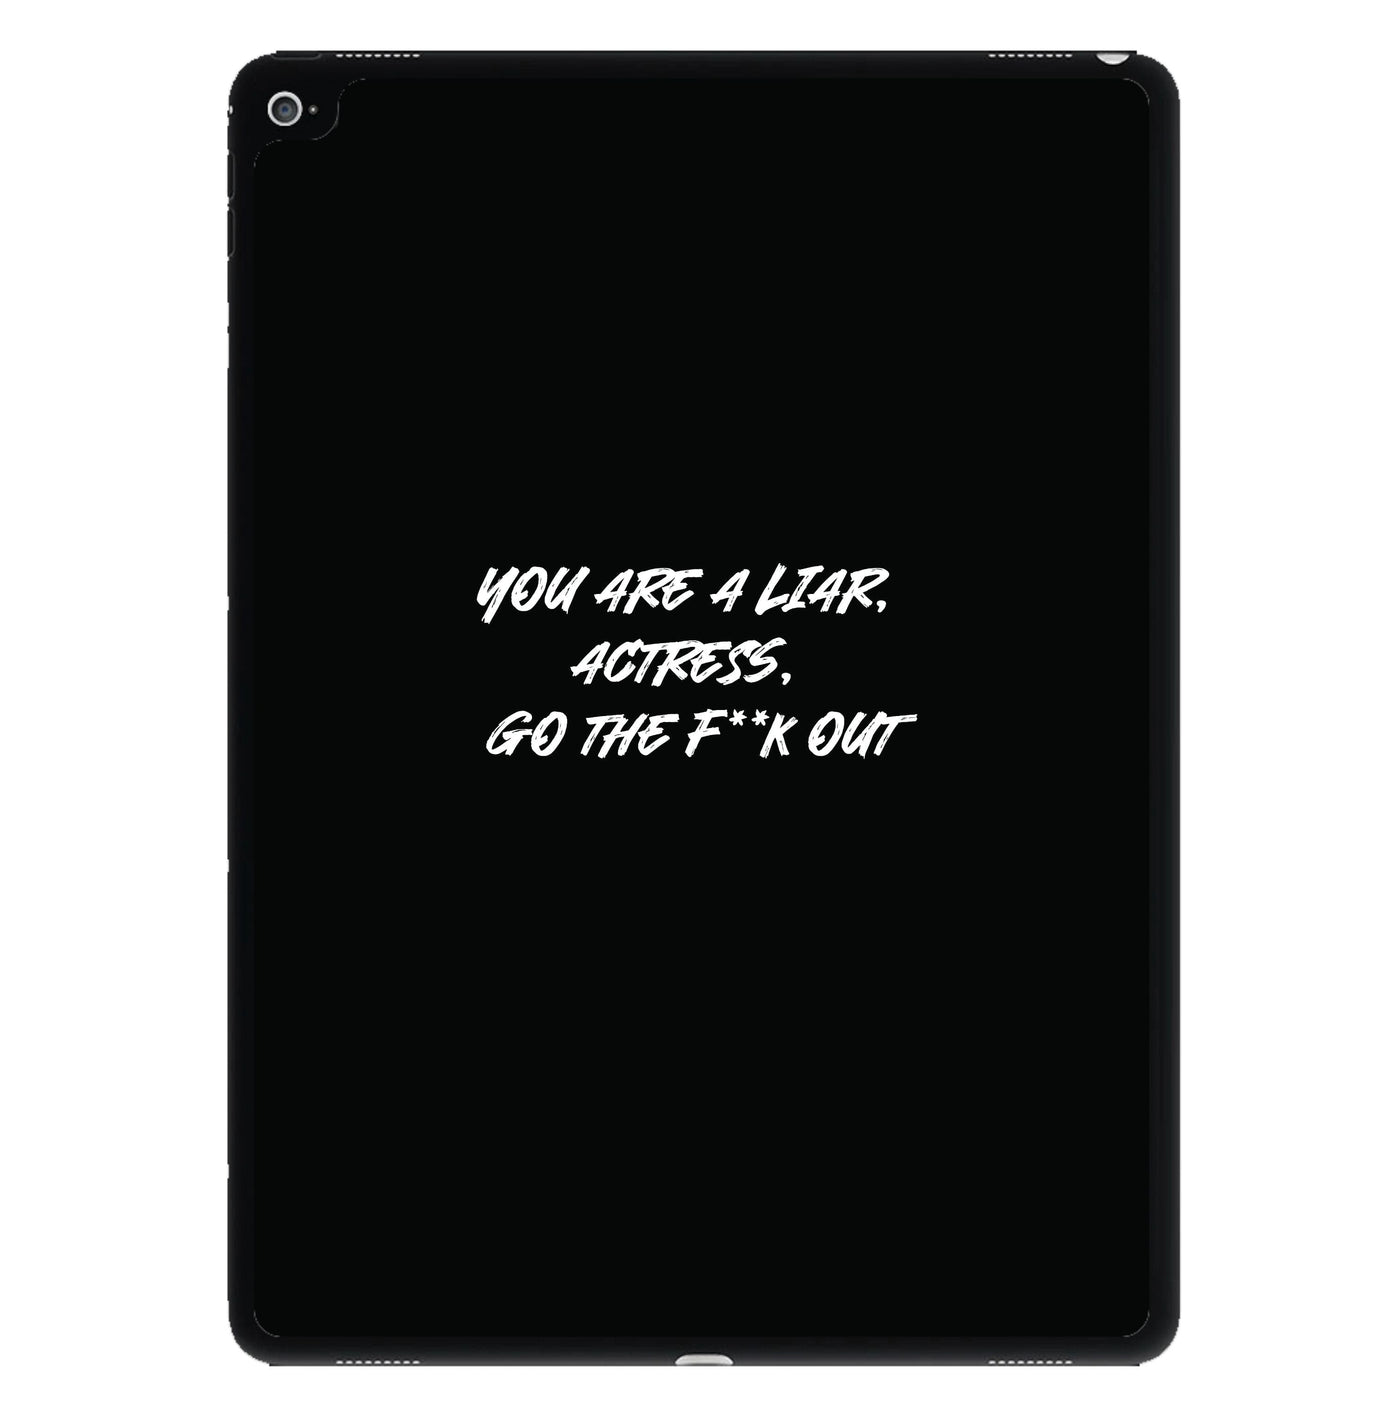 You Are A Liar, Actress, Go The F**k Out - Islanders iPad Case